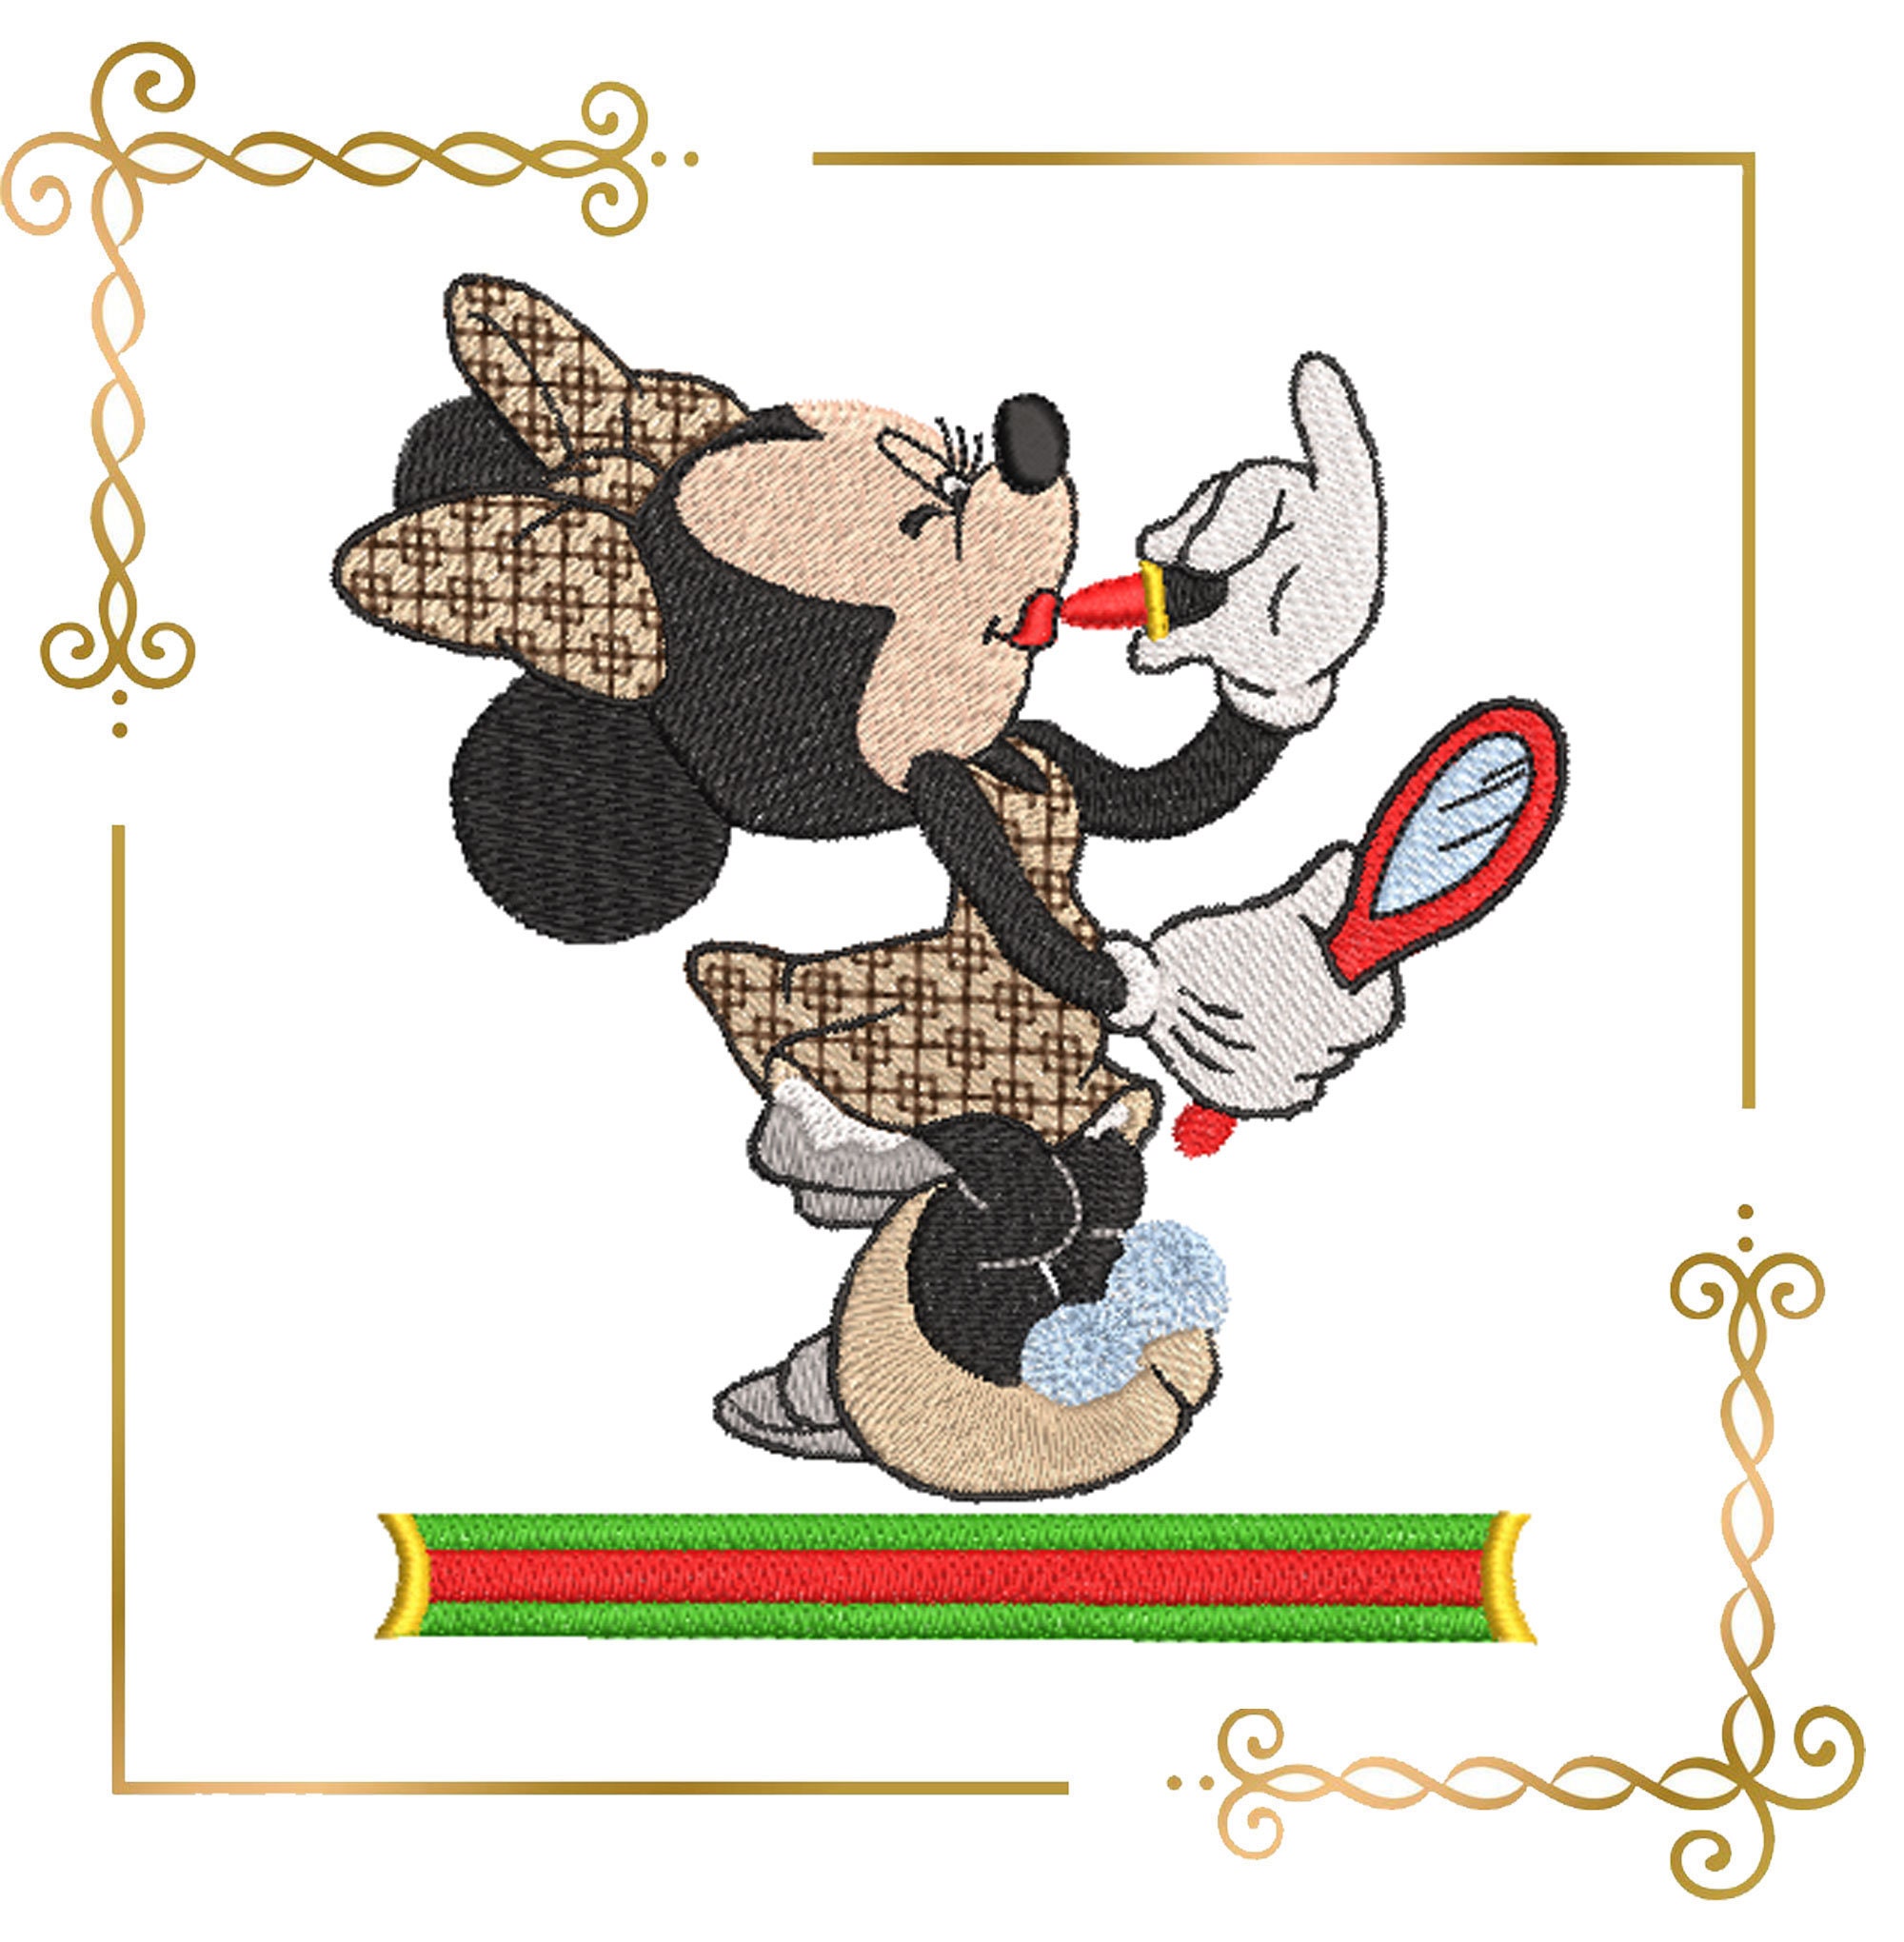 Mouse Head Parody Minnie BOW Embroidery Design to the 